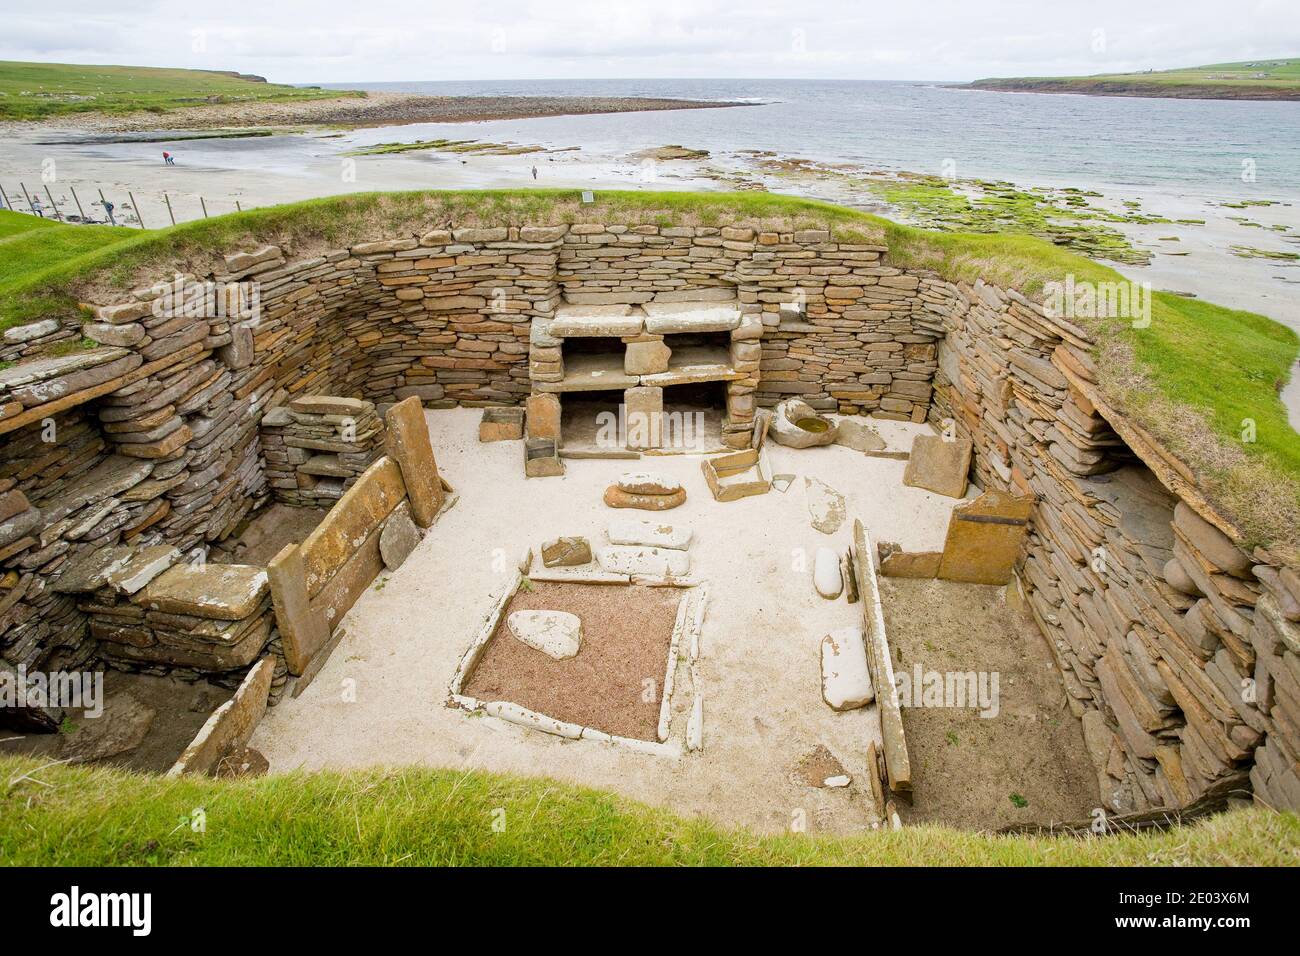 Skara Brae, a stone built Neolithic settlement, located in the Orkney archipelago of Scotland. 3180 BC to 2500 BC. Stock Photo